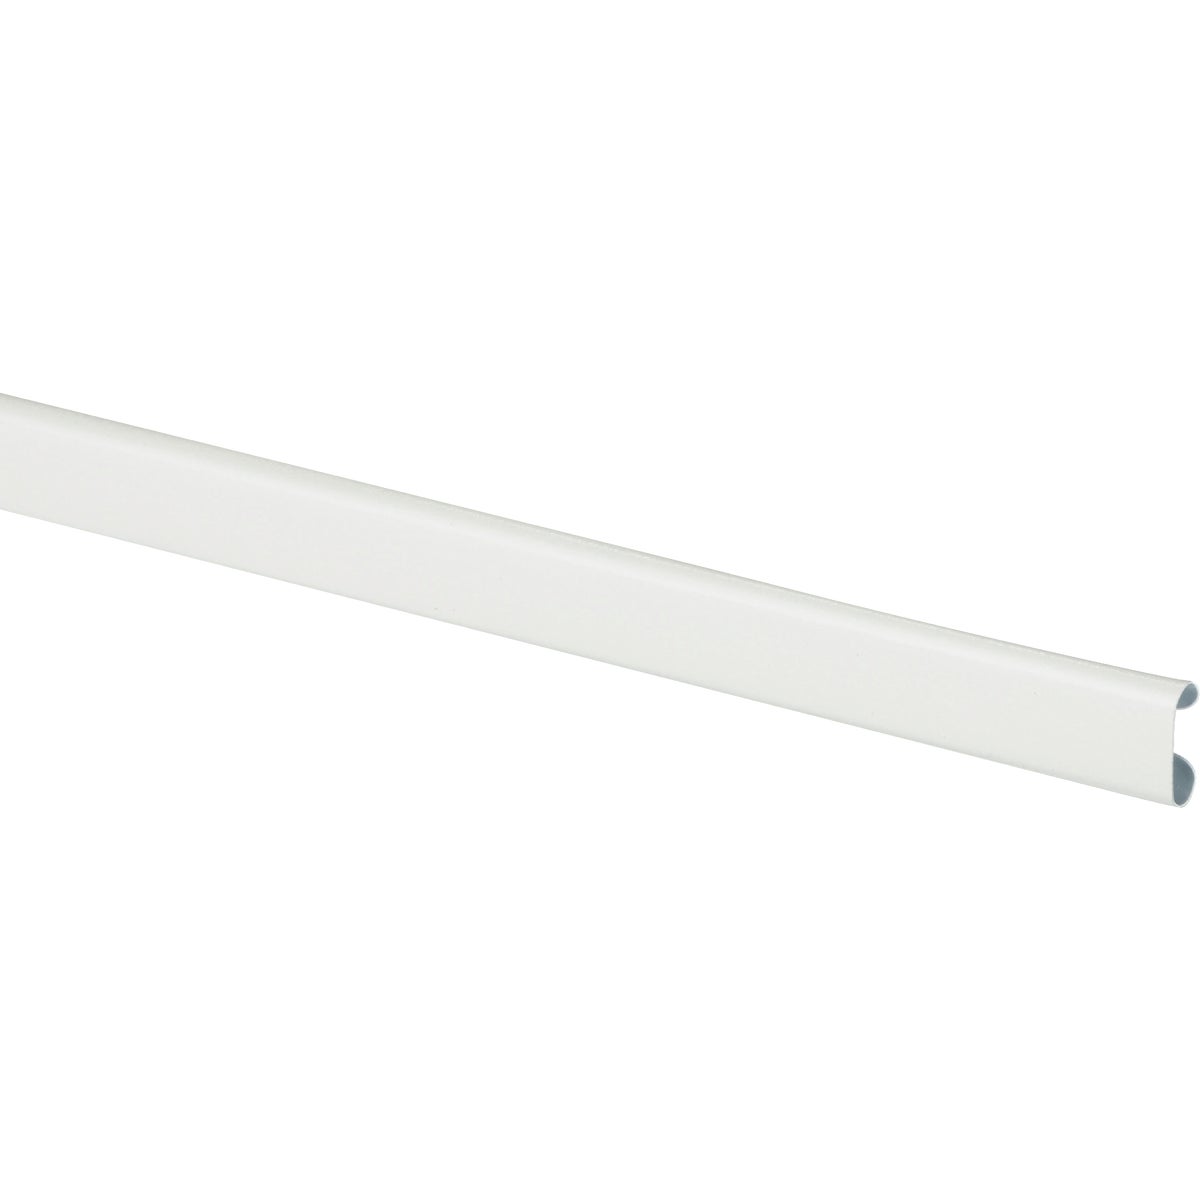 Item 618608, 27 In. extension rod for use with all heavy-duty curtain rods.